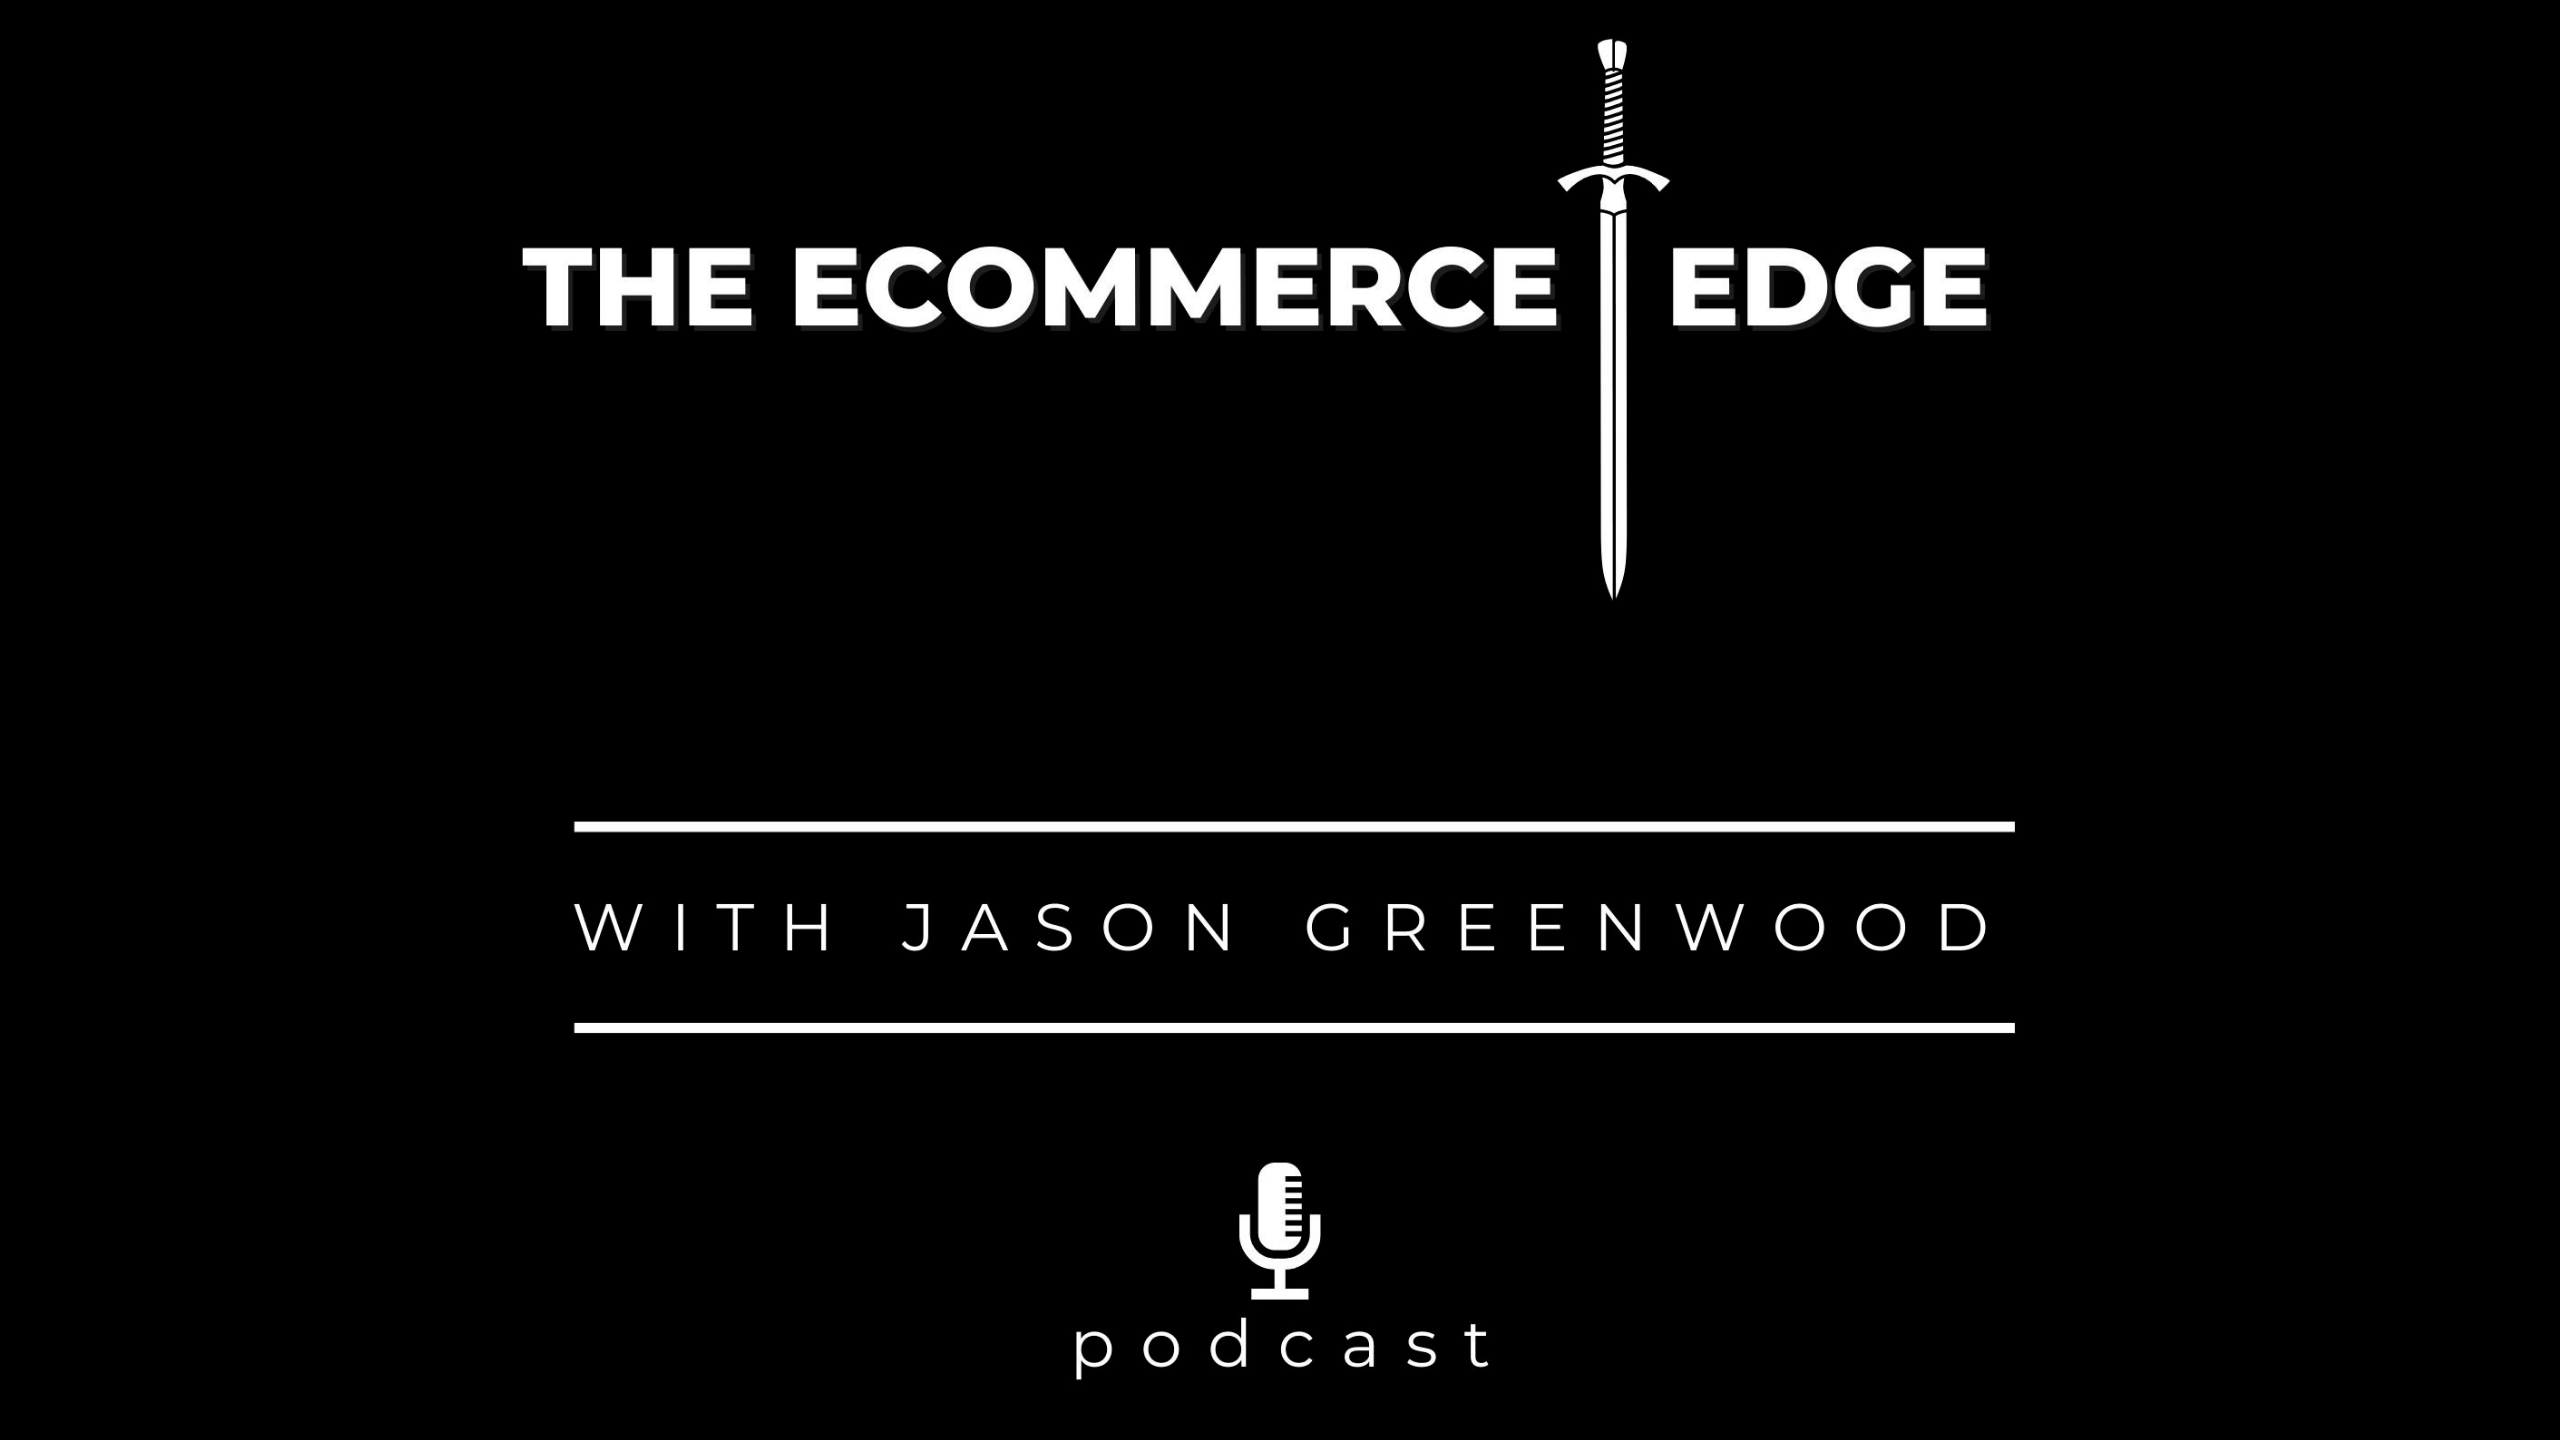 A black background features the logo and title "The ECommerce Edge" with a sword icon dividing the words. Text below reads "With Jason Greenwood." At the bottom center, there's an image of a microphone with the word "podcast" below it.